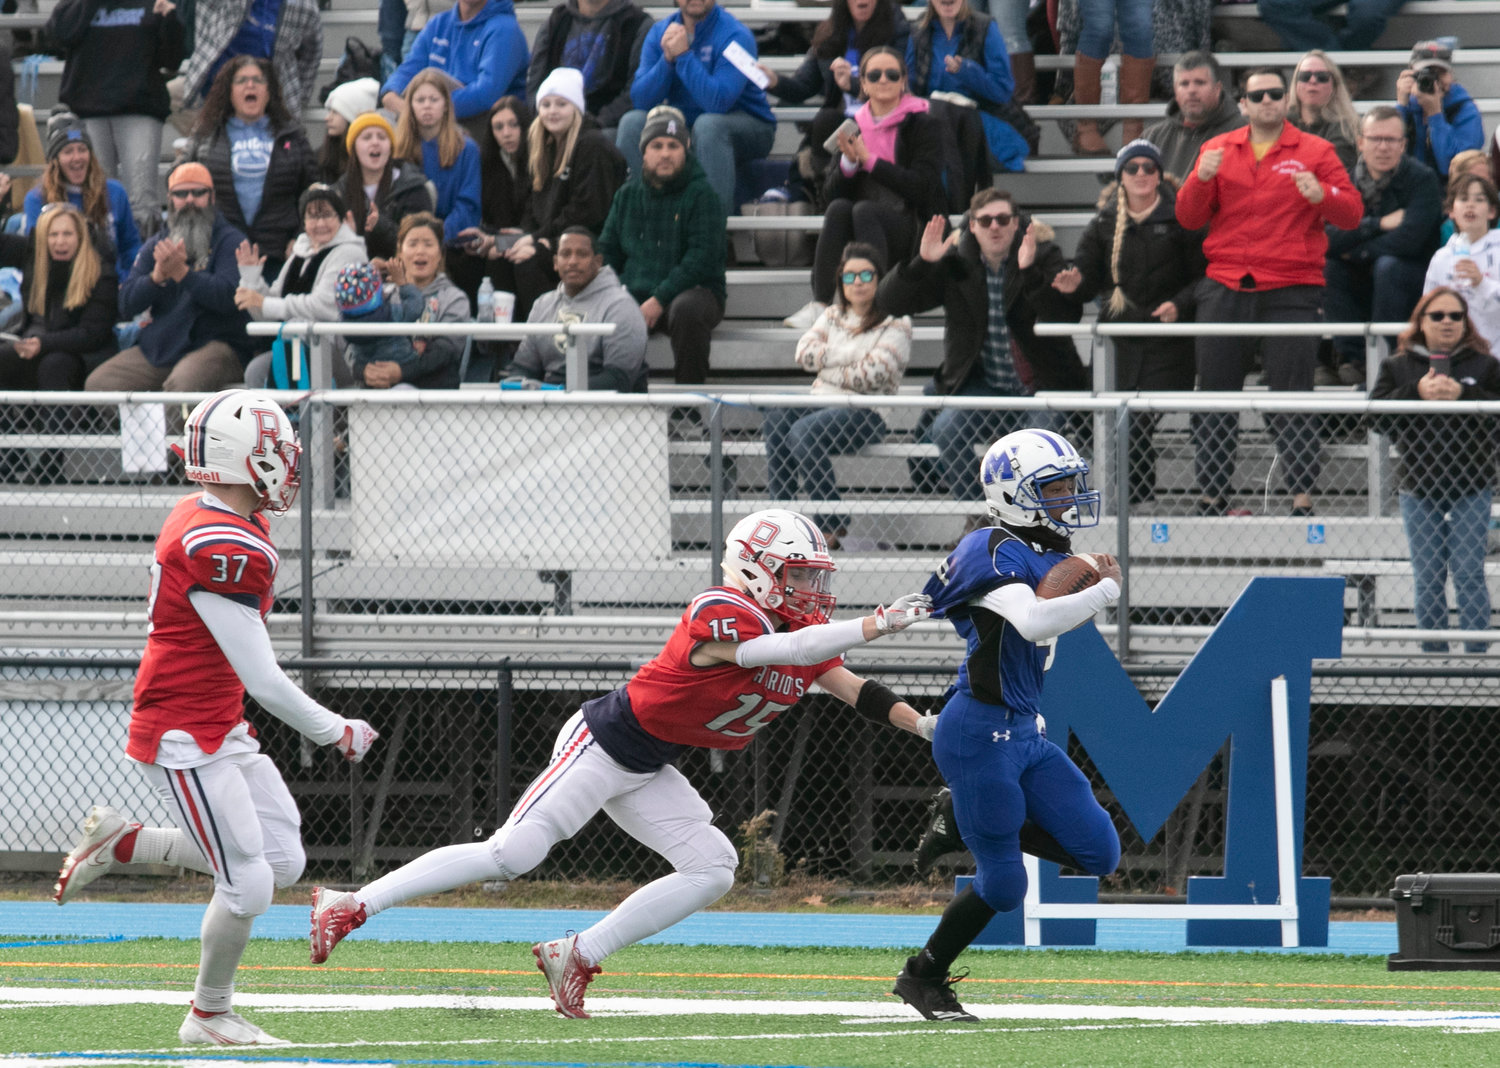 Portsmouth’s Jackson Mello saves a Middletown touchdown by tackling Jacoby Smith as he ran down the left sideline.